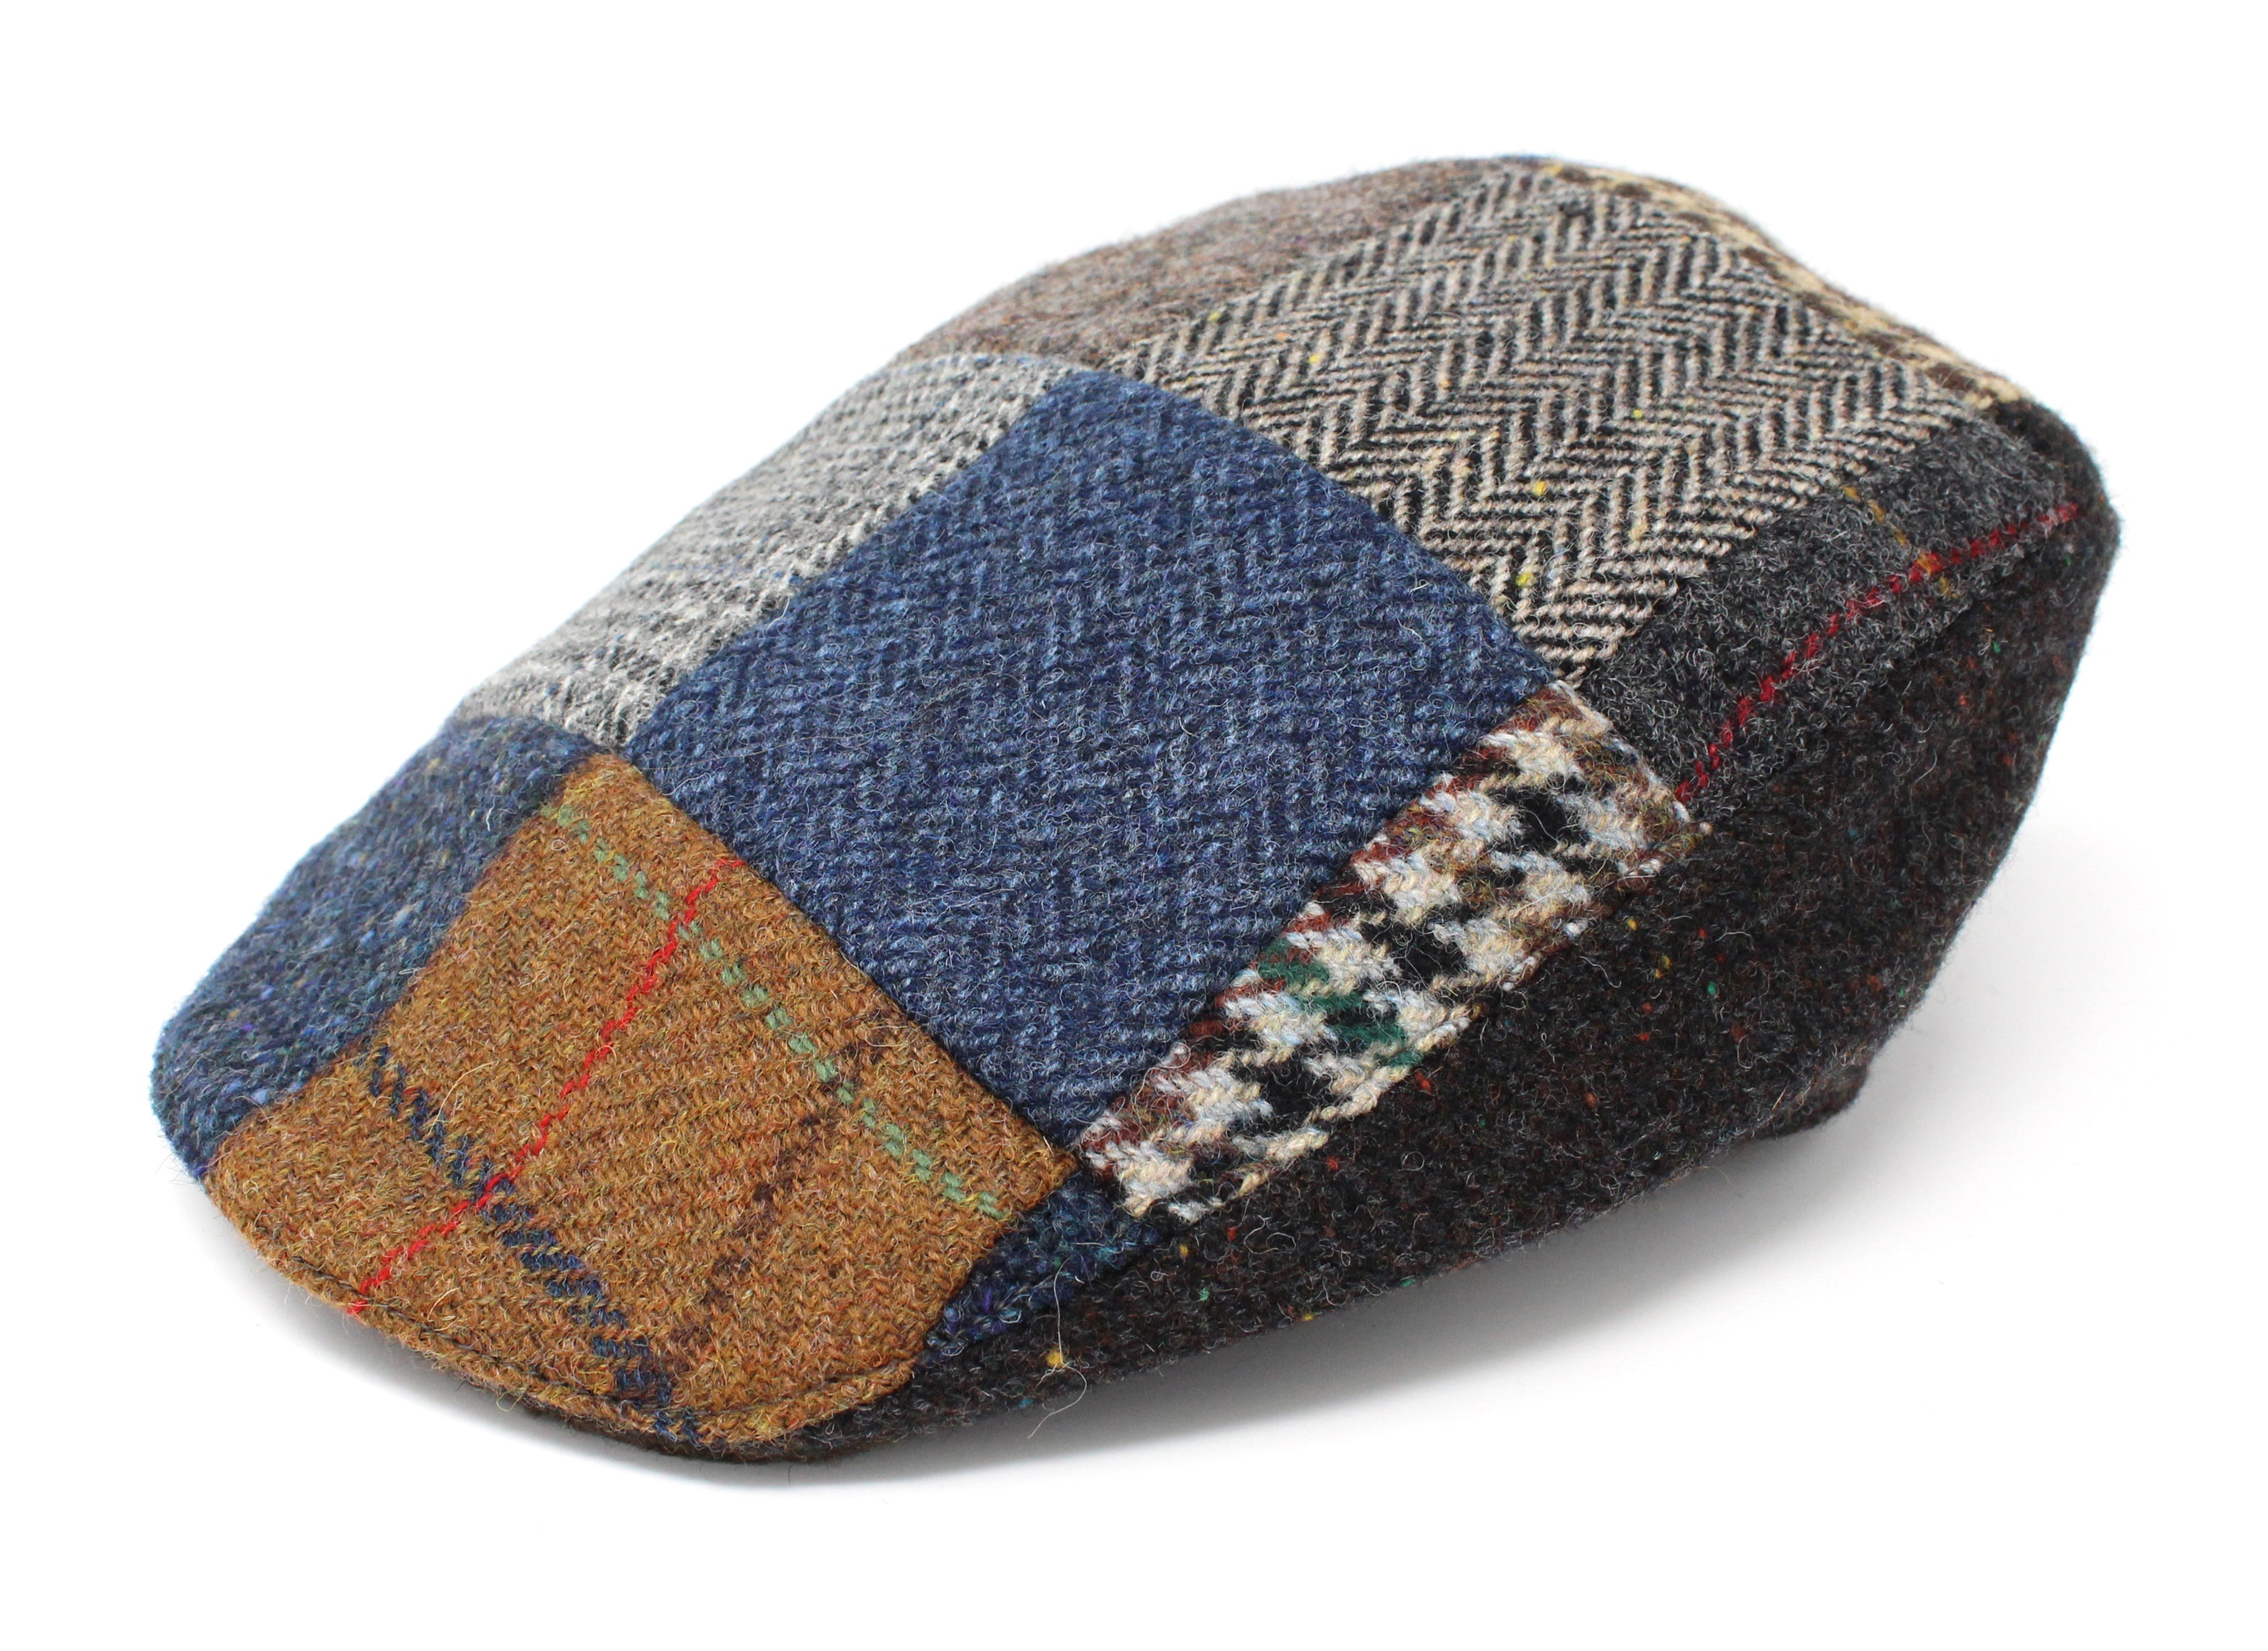 Hanna Hats Donegal Touring Cap Patchwork Tweed